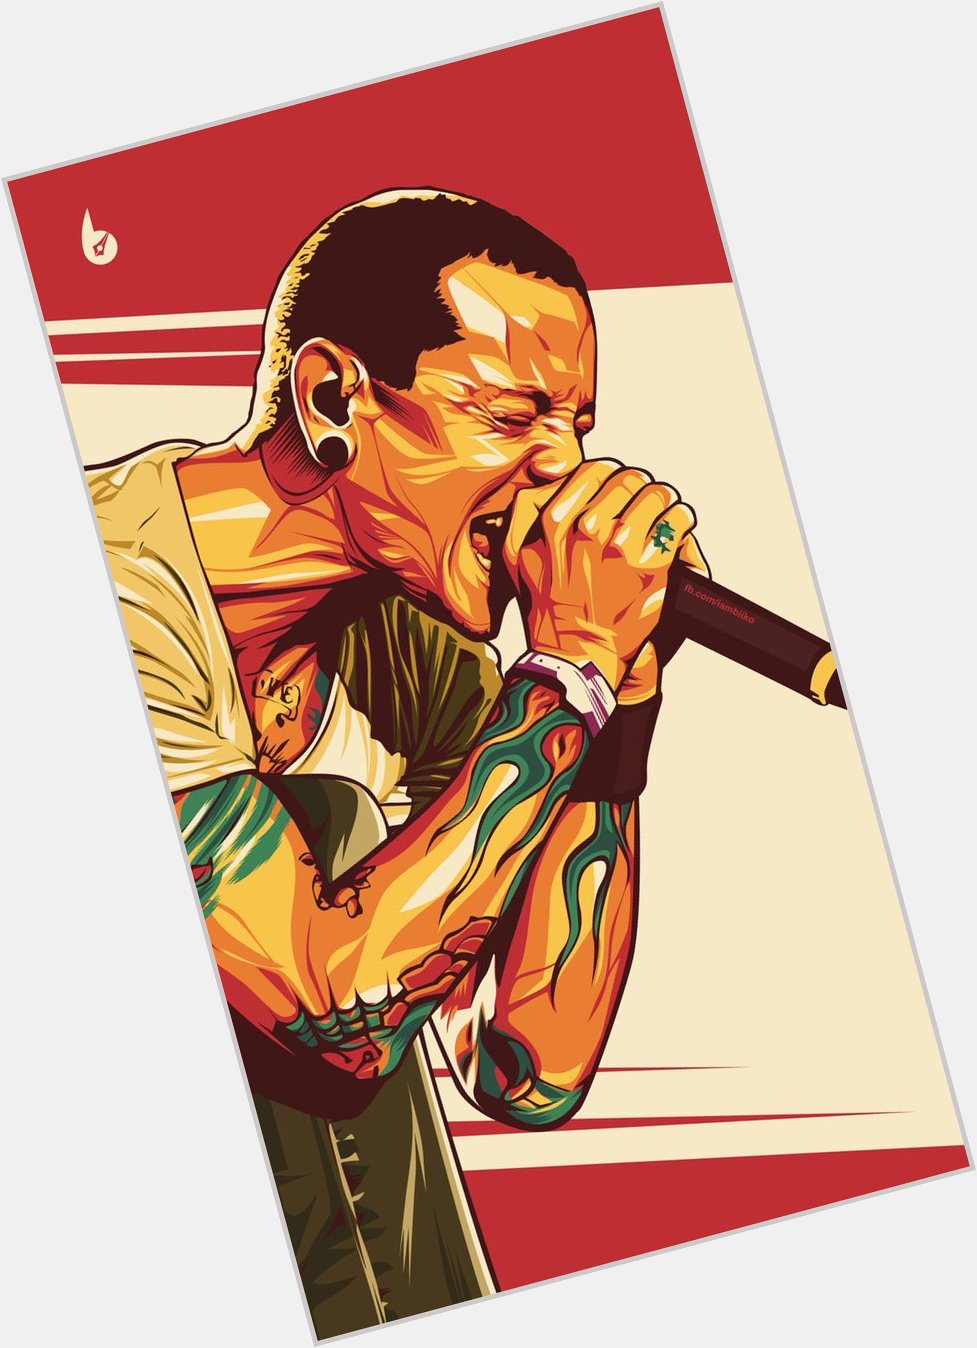 Happy Birthday To The Legendary Chester Bennington U Are The Greatest Singer Of All Time We Miss U Alot   